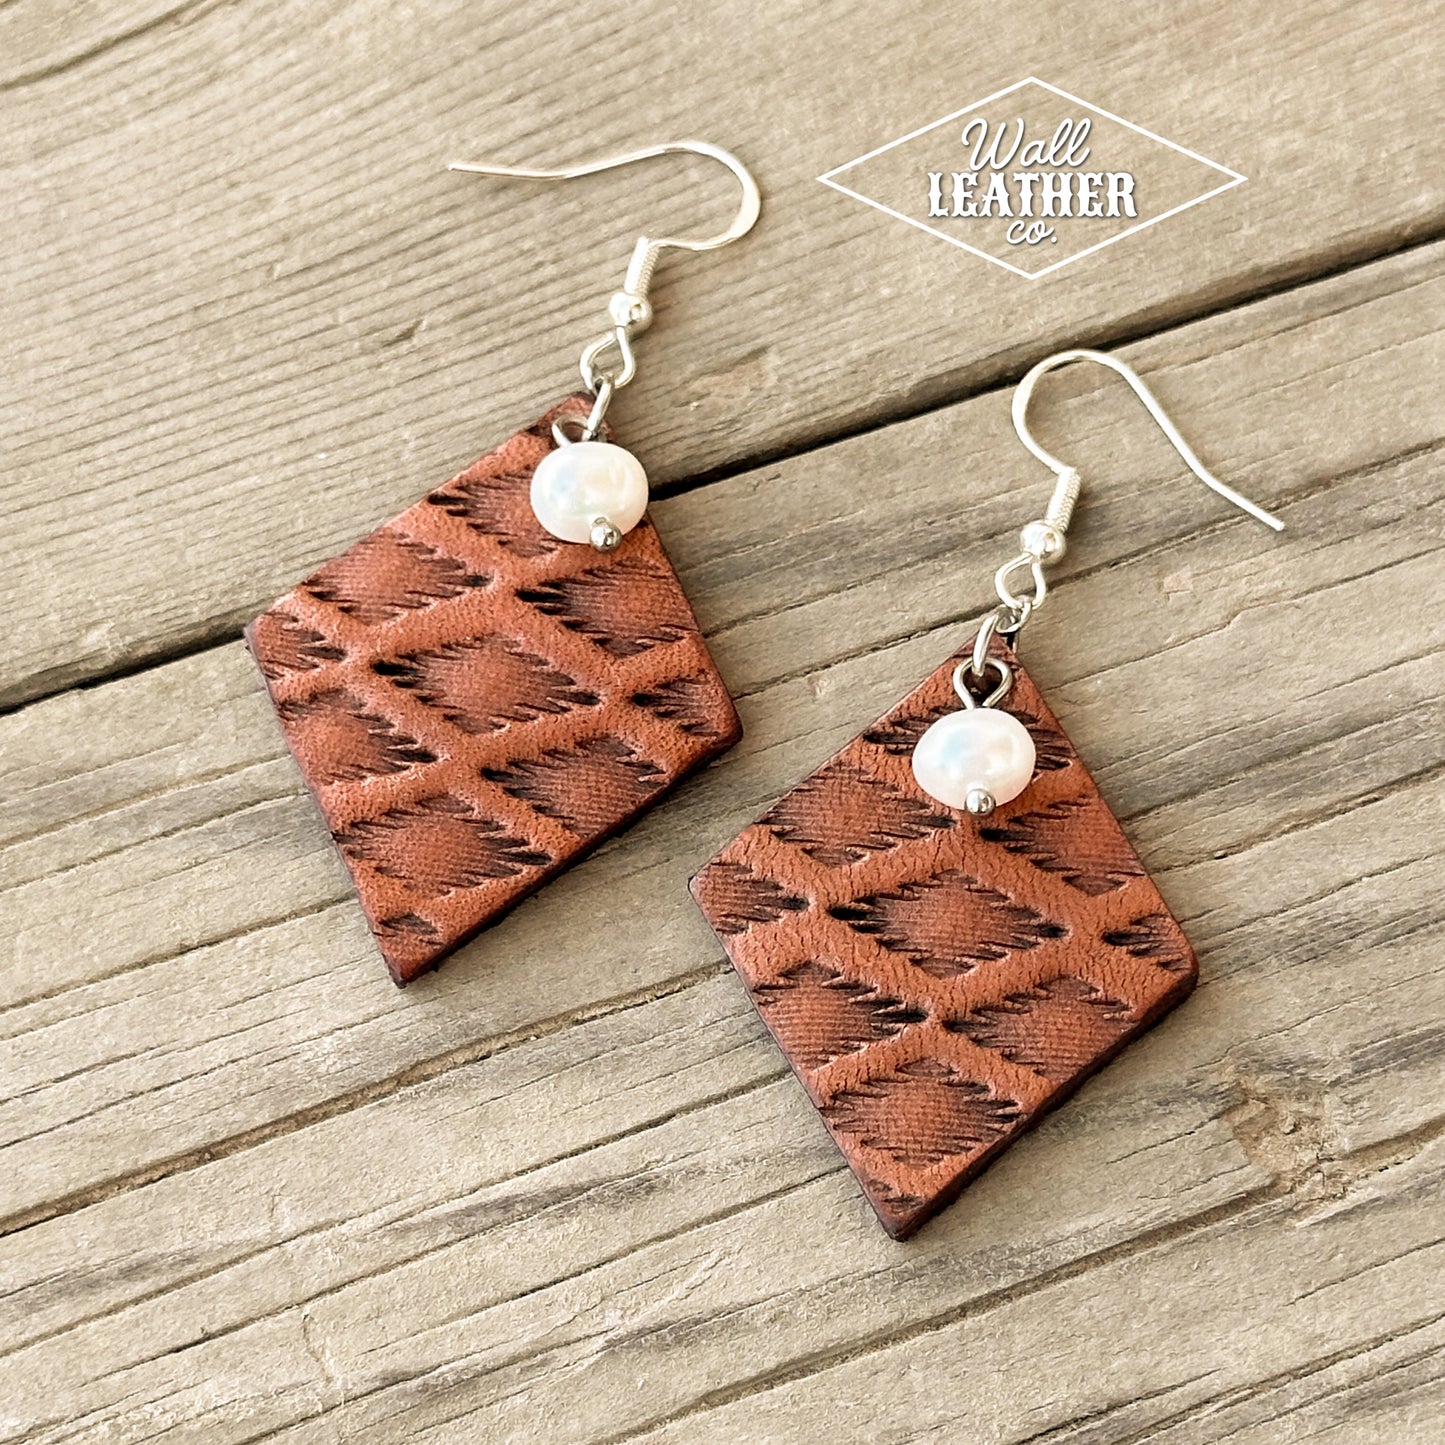 Aztec Print Leather Earrings with Pearl